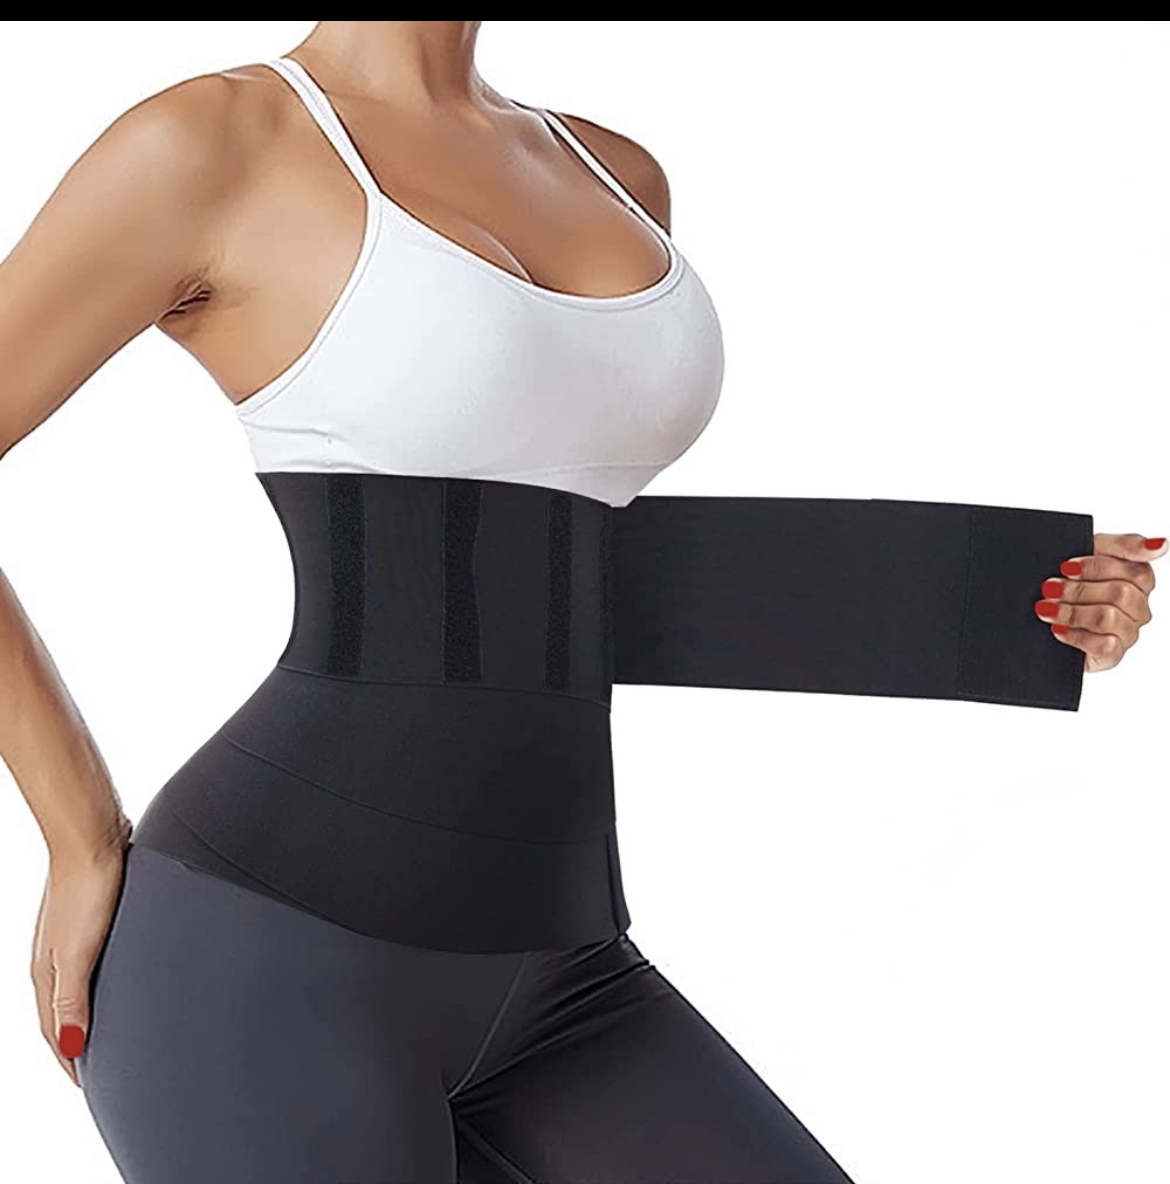 IBRsport Offers Comfortable And Breathable Waist Trainer For Women